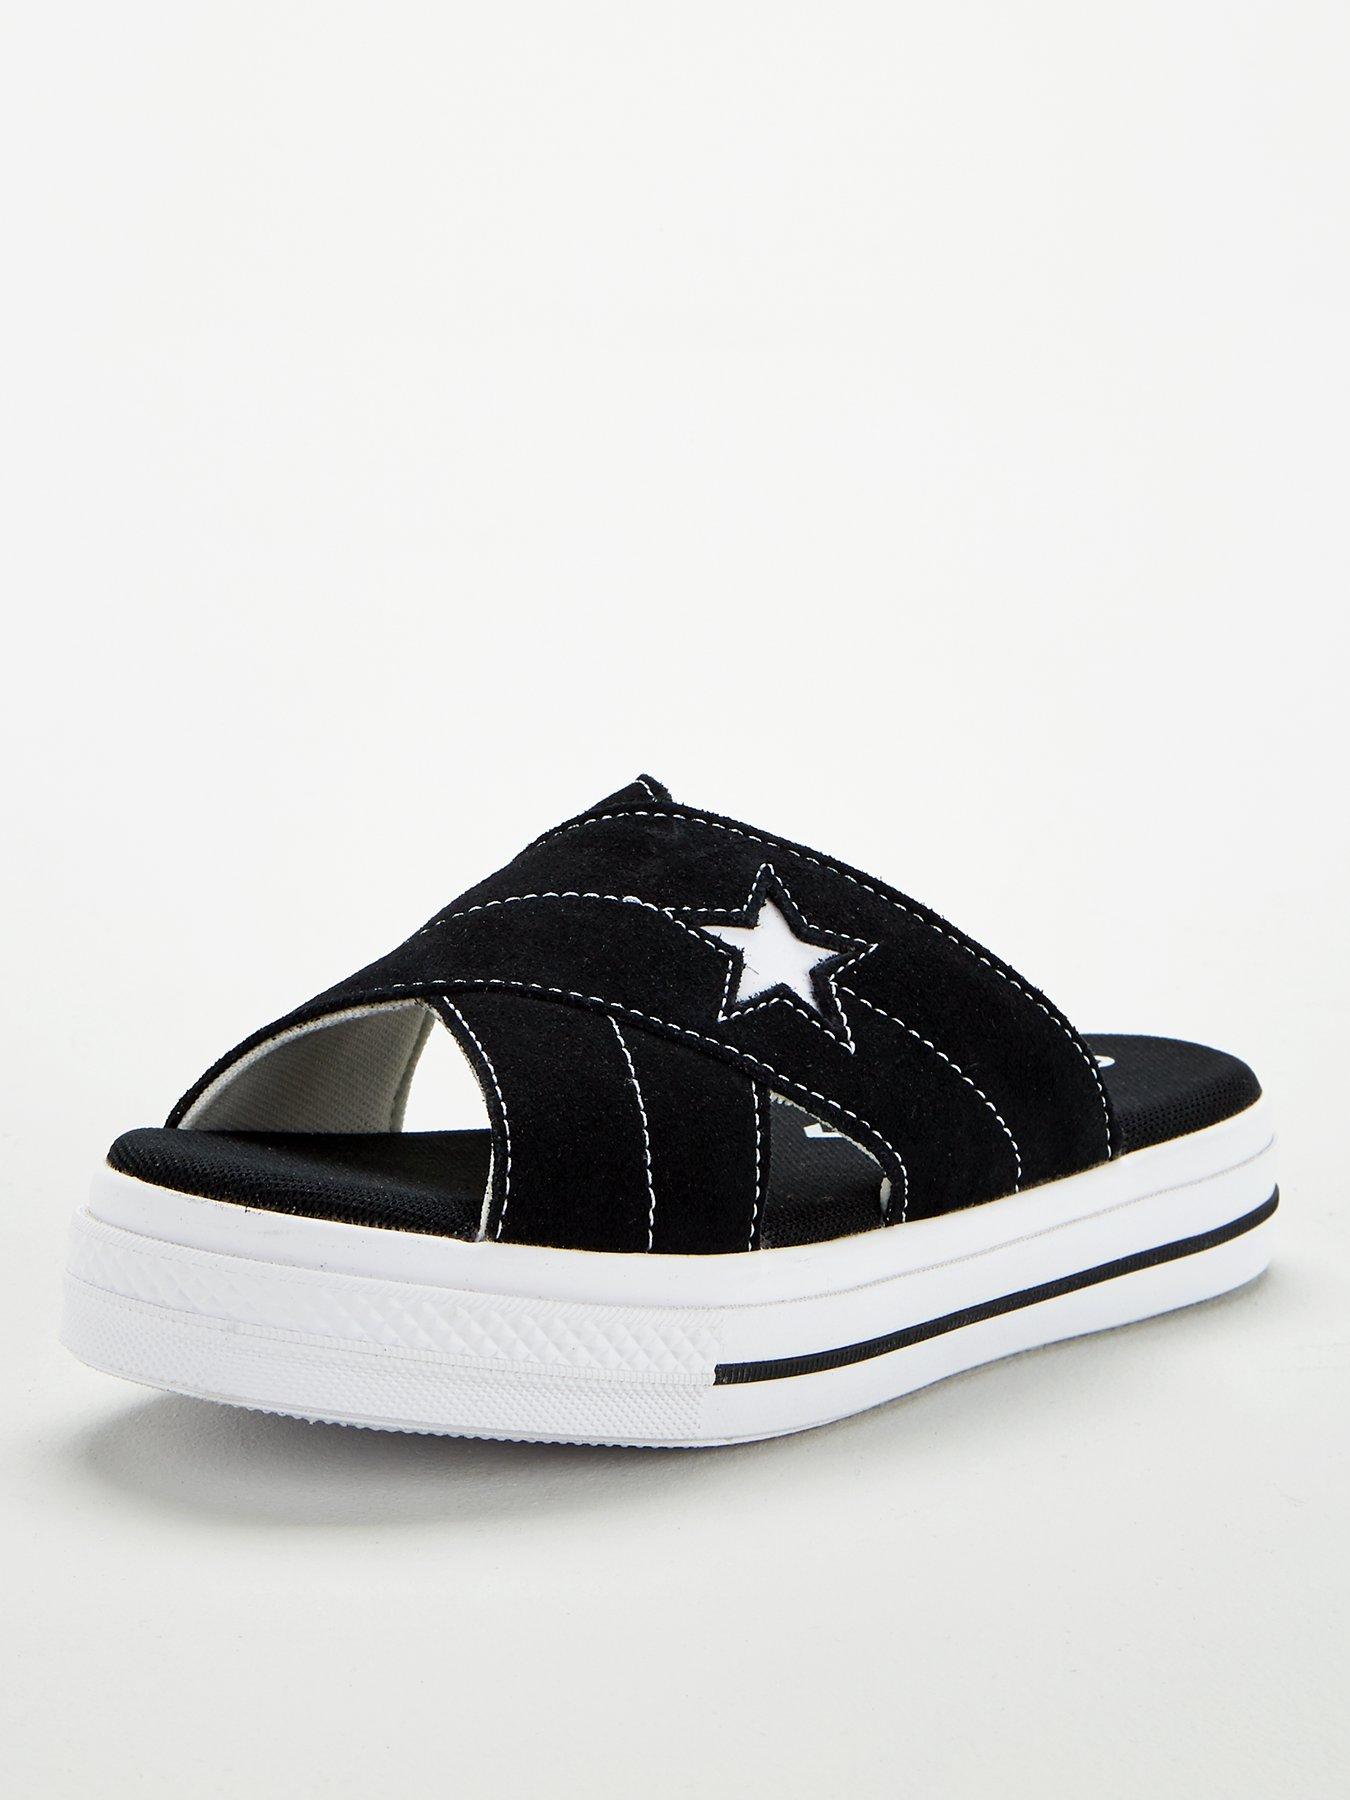 converse one star size 3